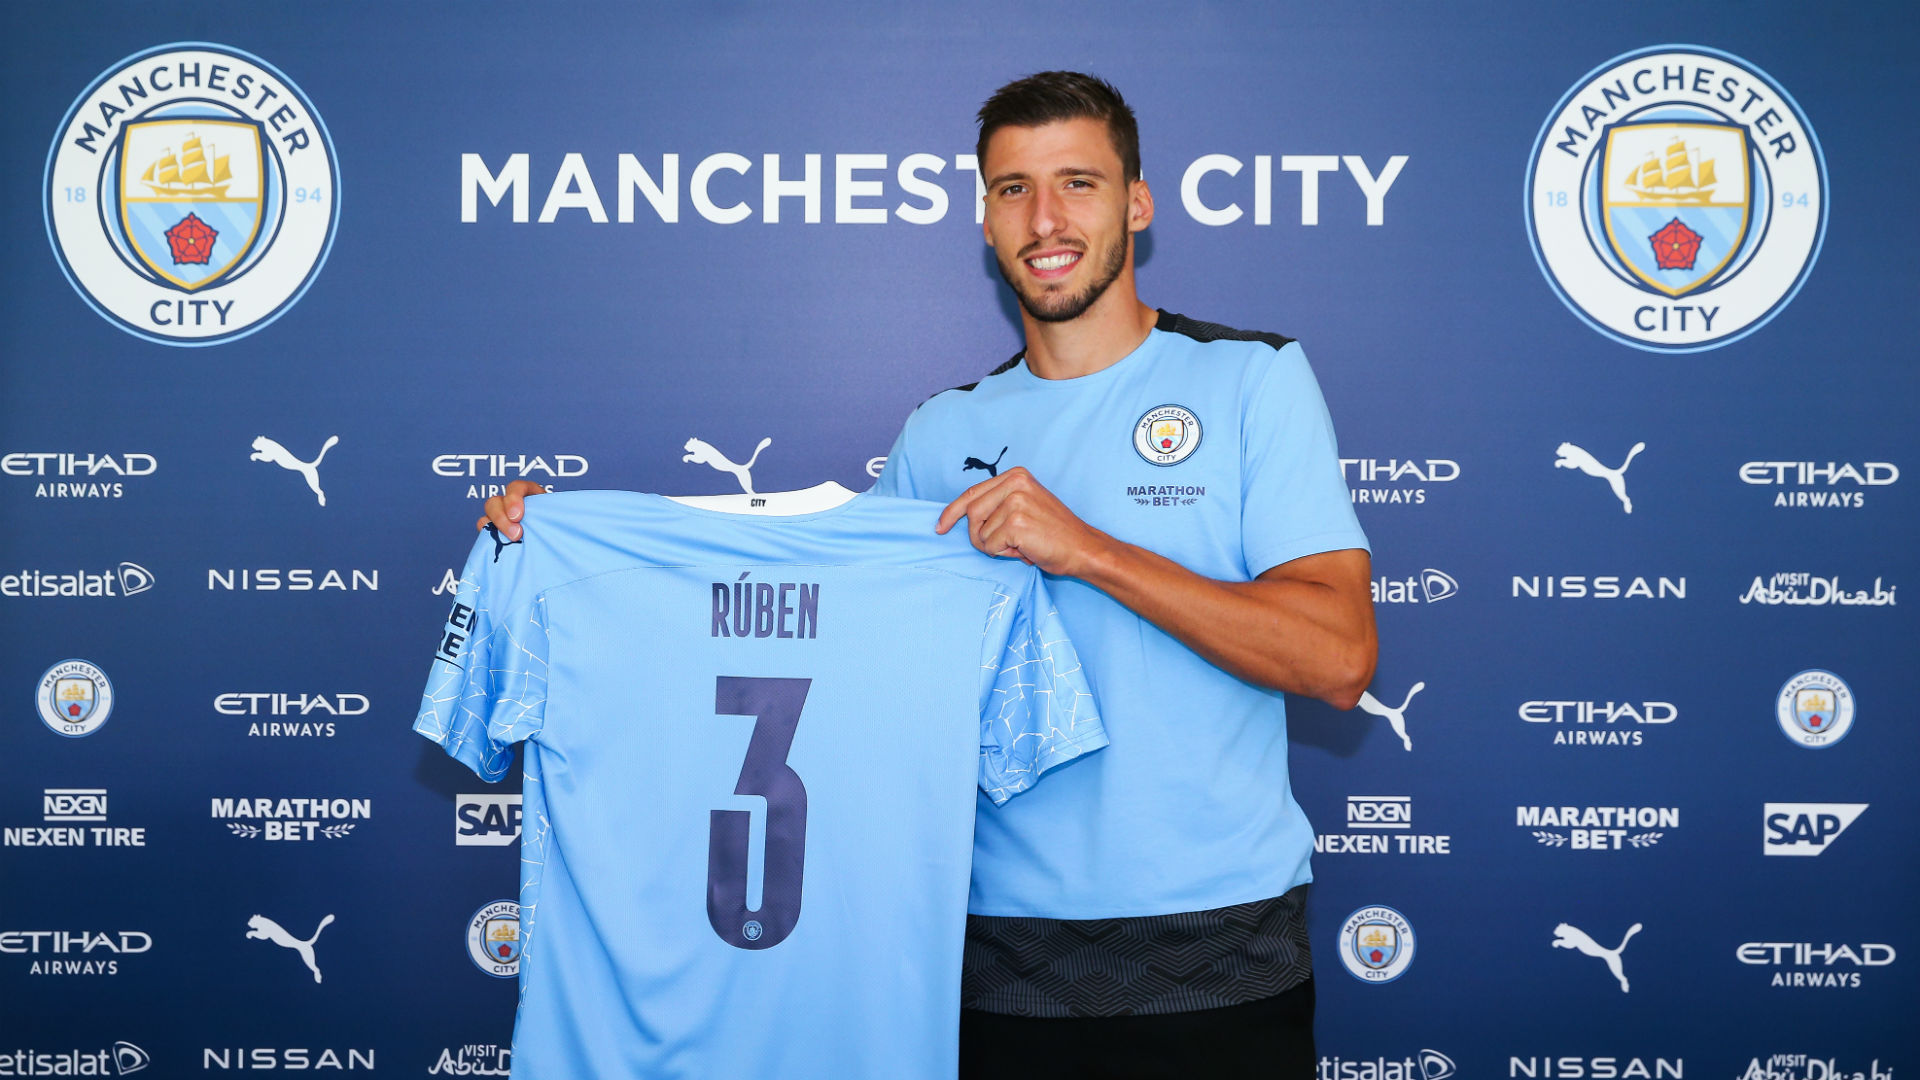 Manchester City formally announced the signing of Ruben Dias on Tuesday, with Nicolas Otamendi going the other way to join Benfica.